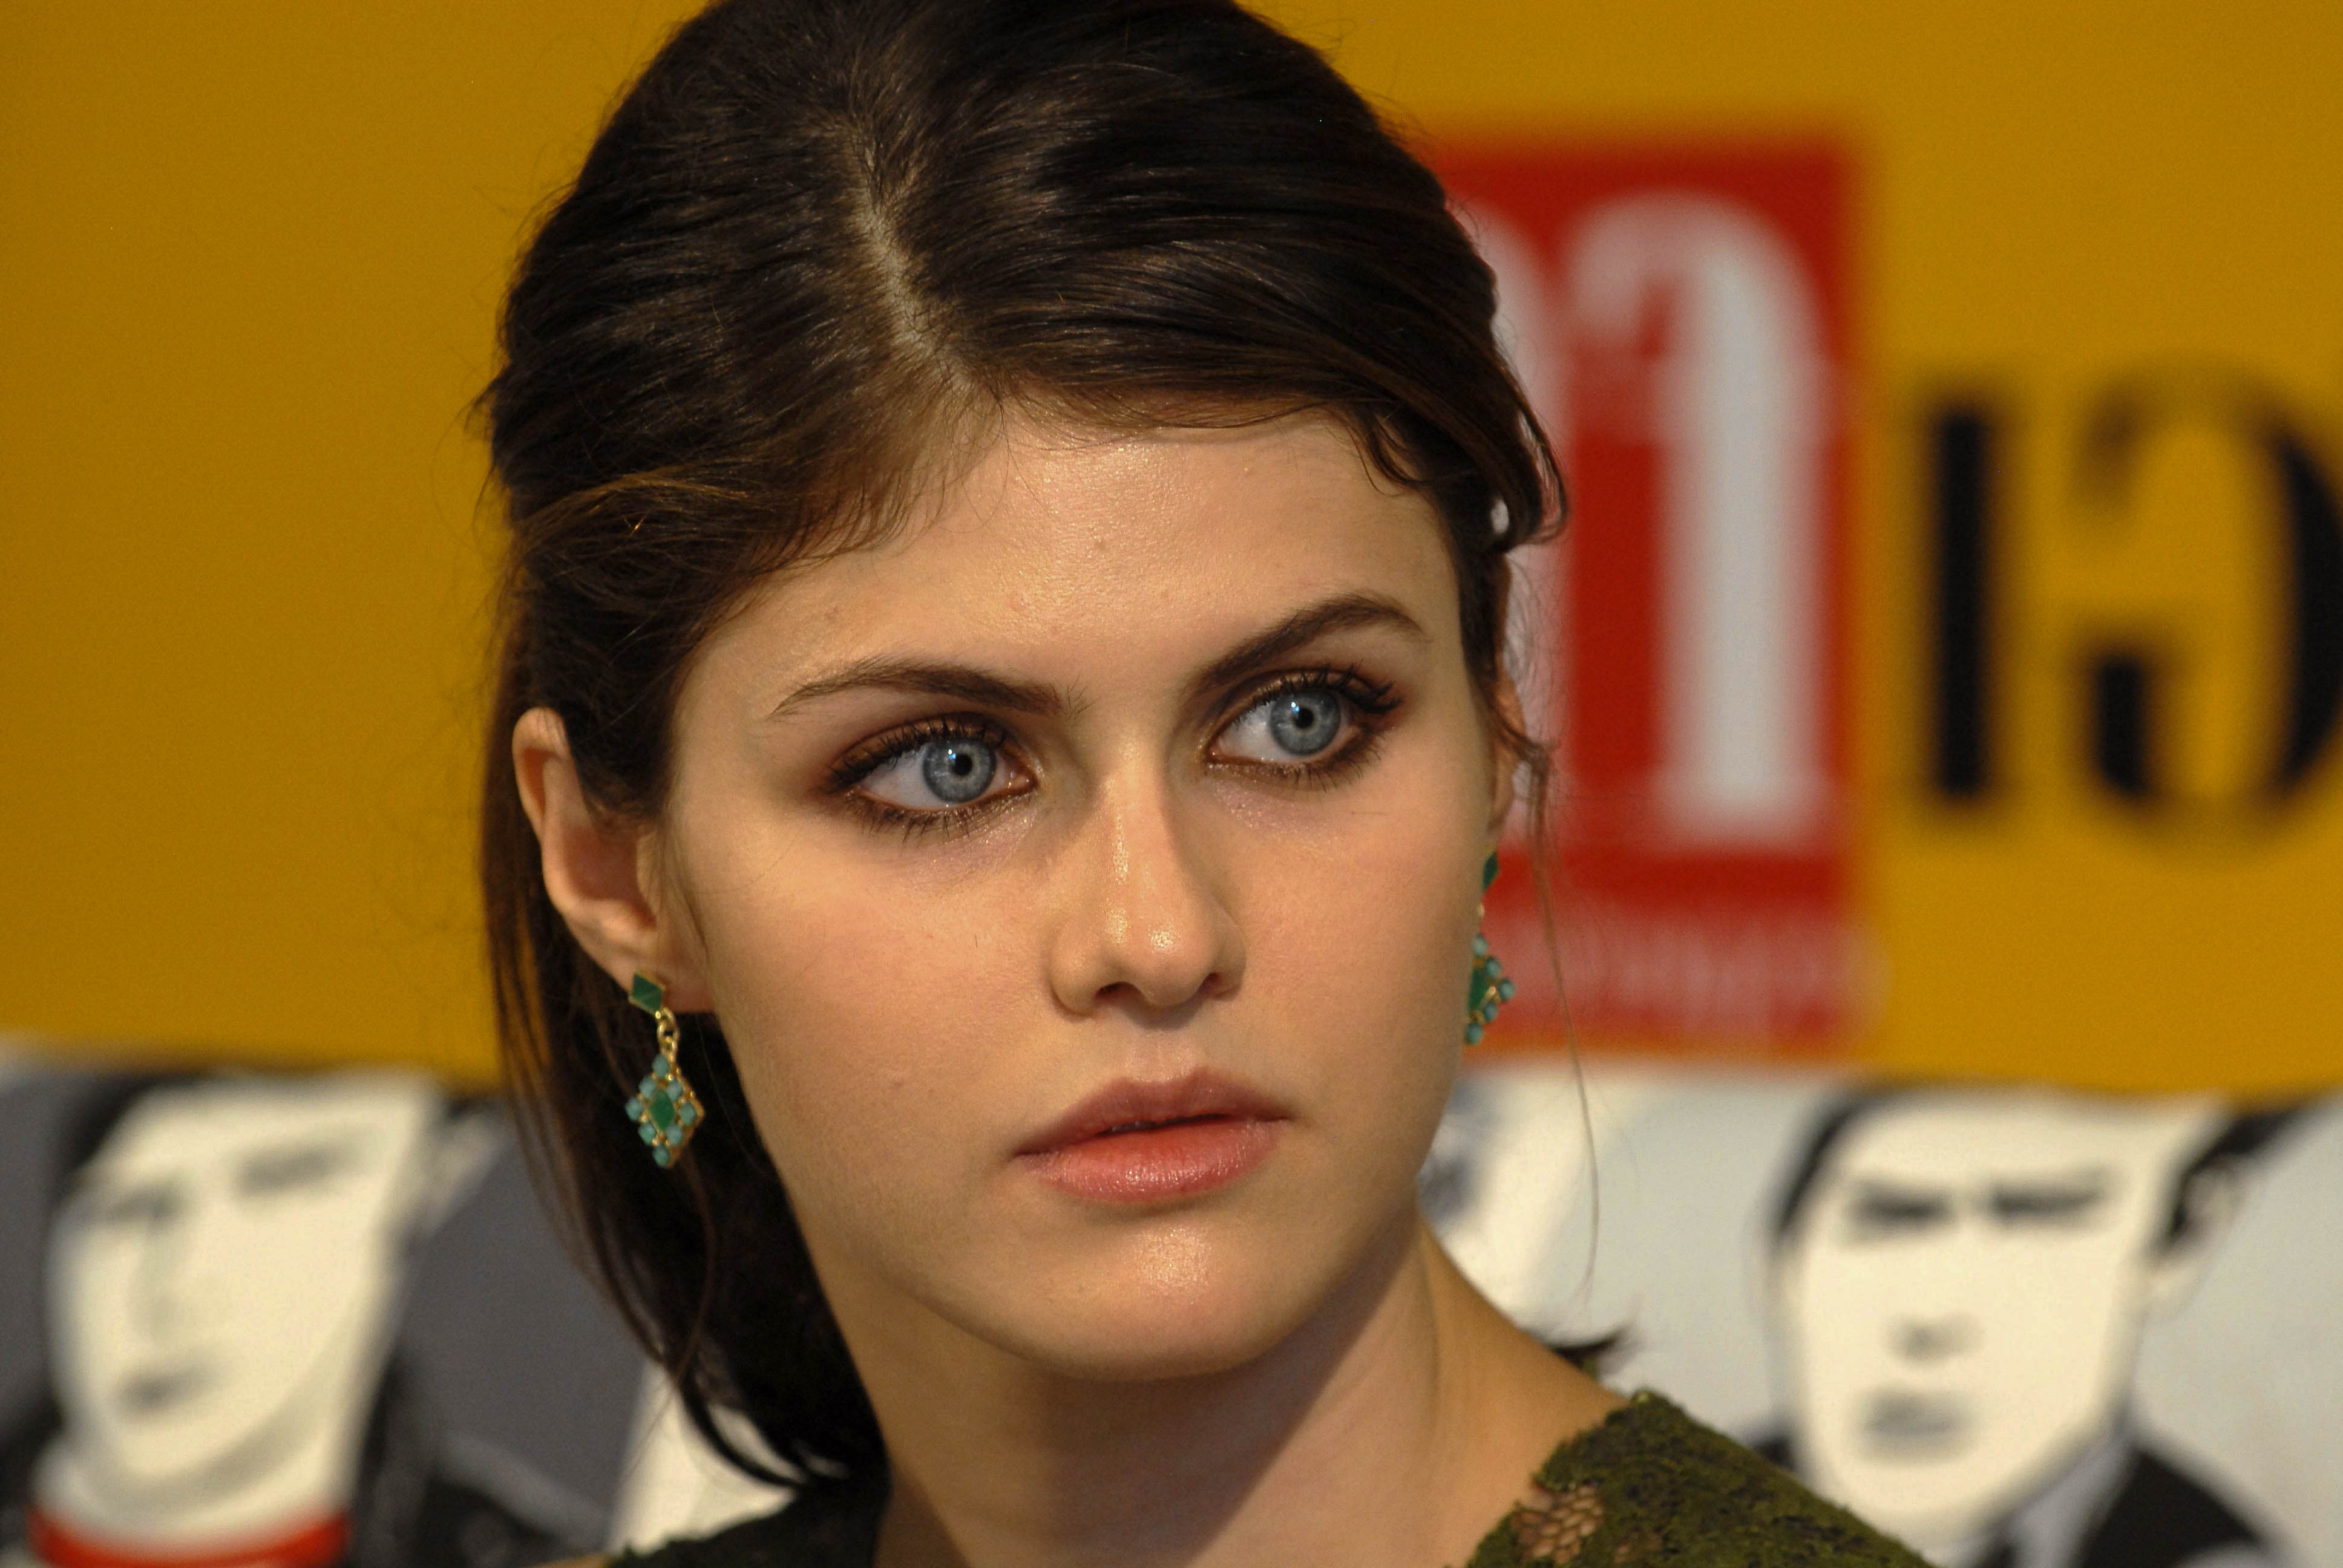 Beautiful Alexandra Daddario Marie Claires Fresh Faces Photoshoot Wallpapers